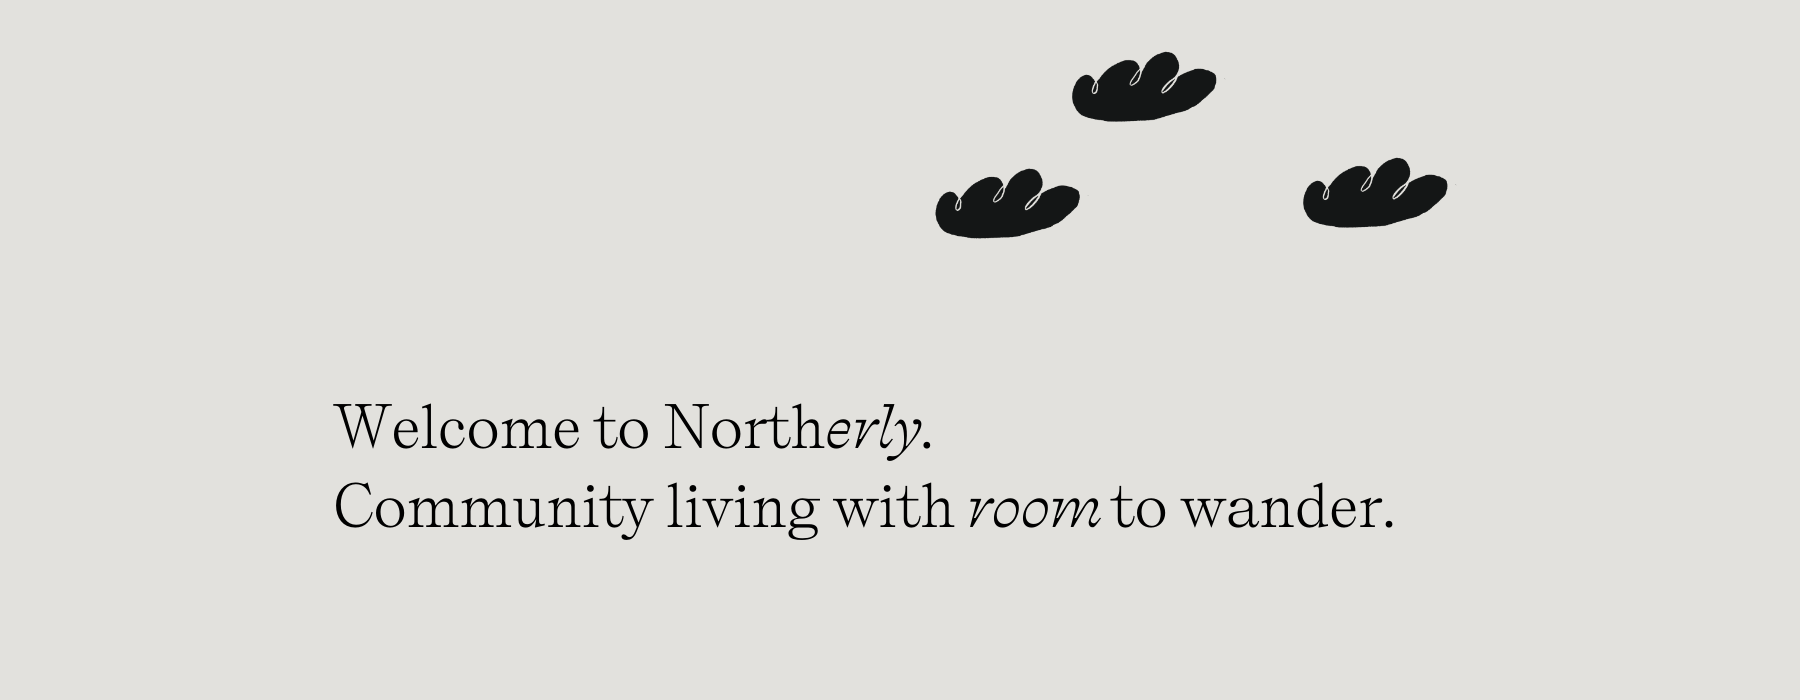 Welcome to Northerly